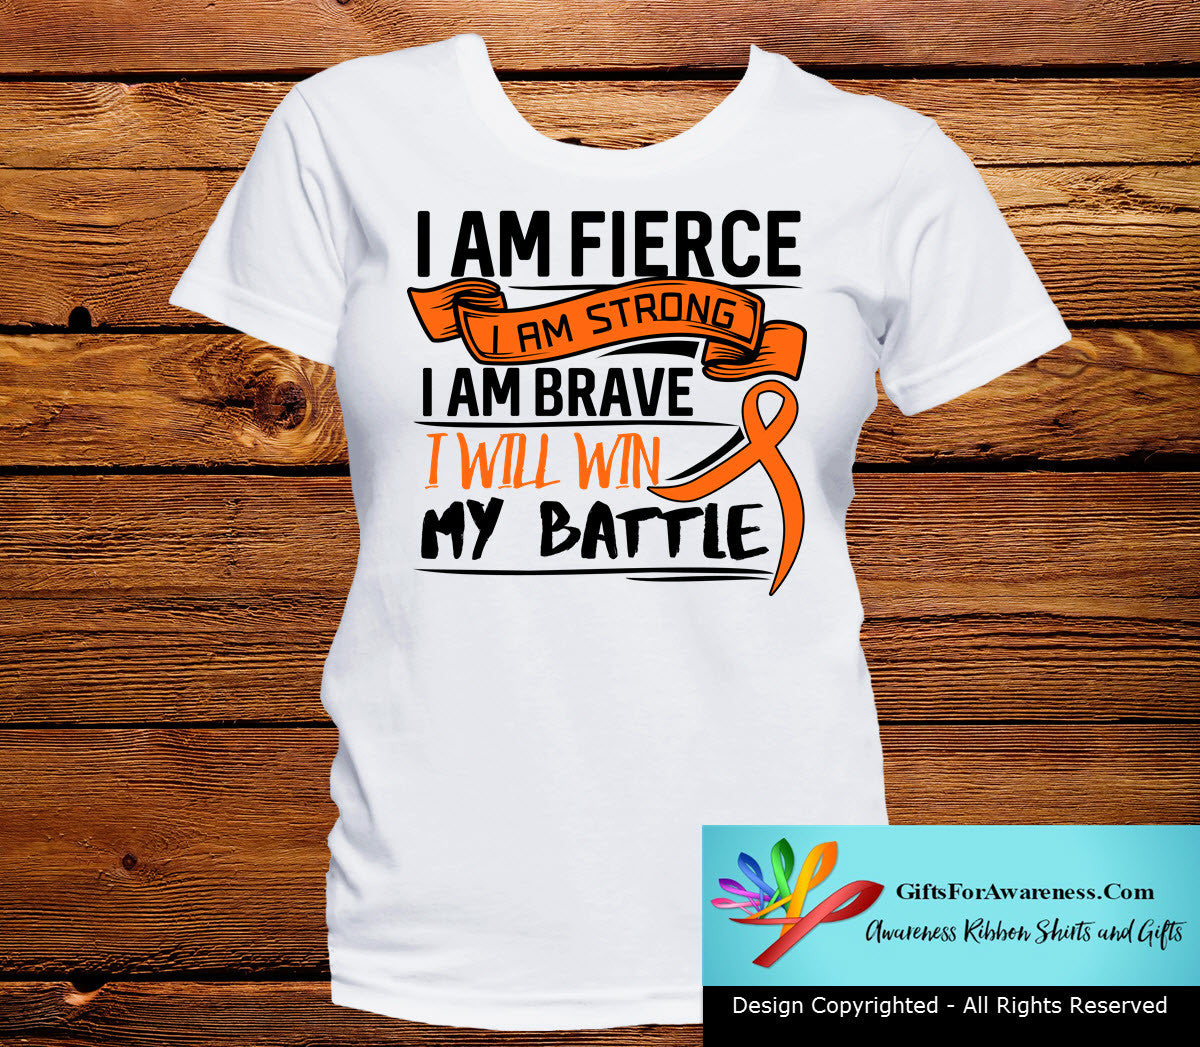 COPD I Am Fierce Strong and Brave Shirts - GiftsForAwareness